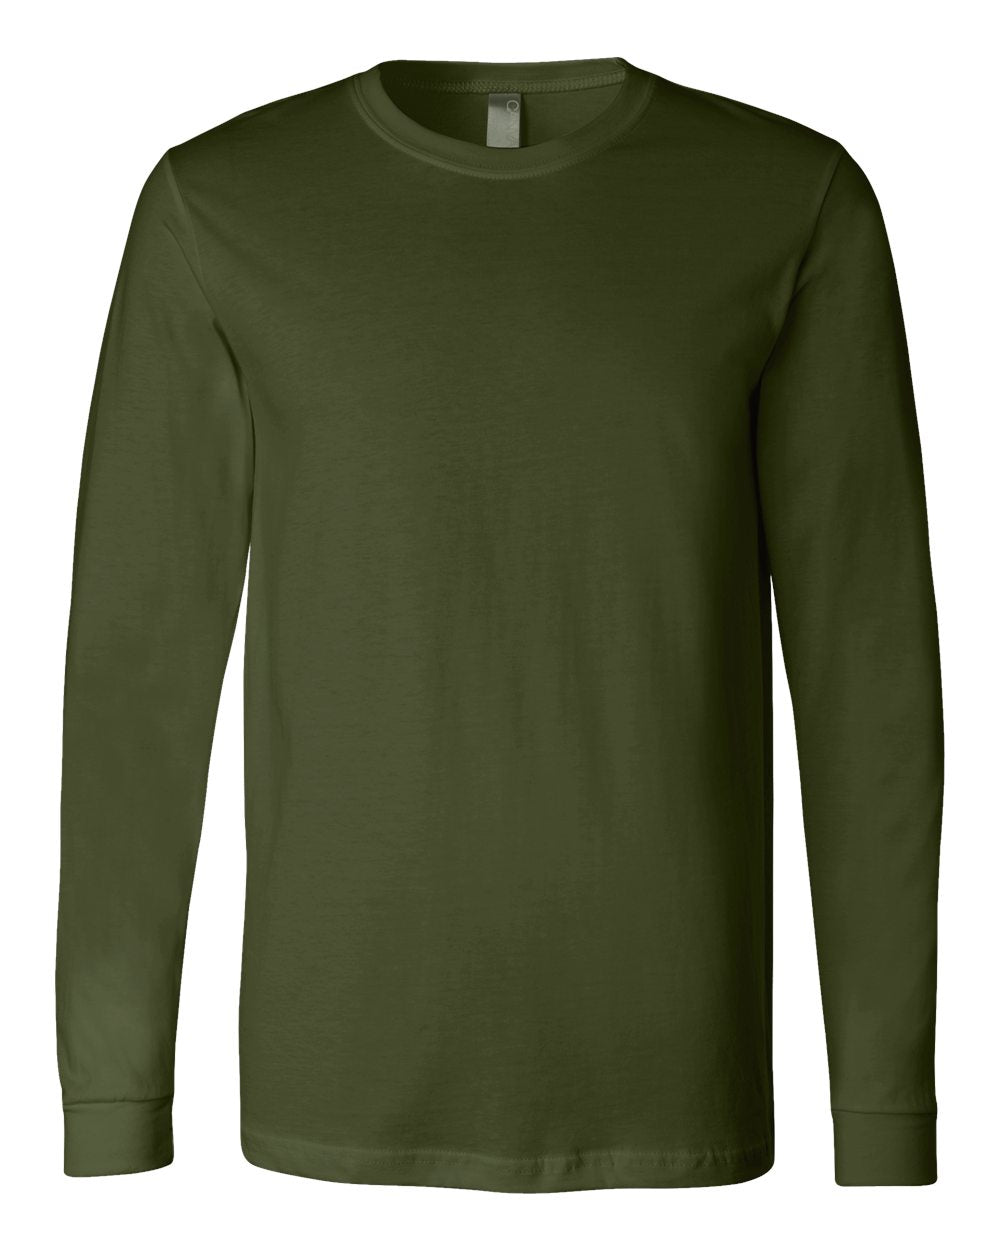 Bella + Canvas Long Sleeve (3501) in Olive